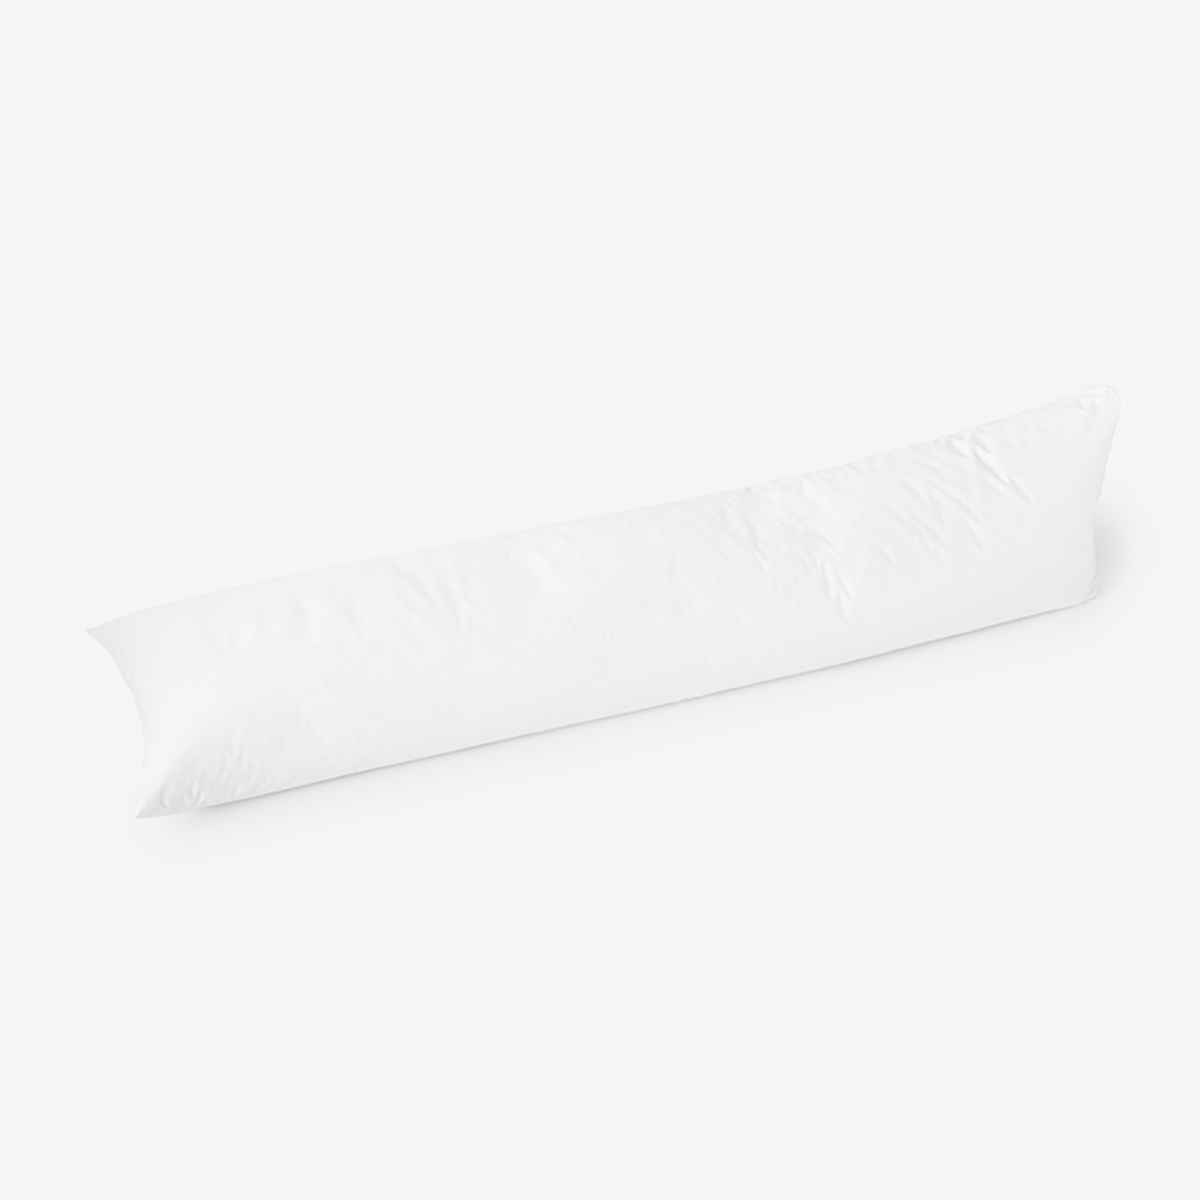 https://companystore-res.cloudinary.com/image/upload/f_auto,q_40,dpr_3.0/w_400,c_scale/webimages/11135a_insert_bodypillow_downalt?_s=RAABAB0